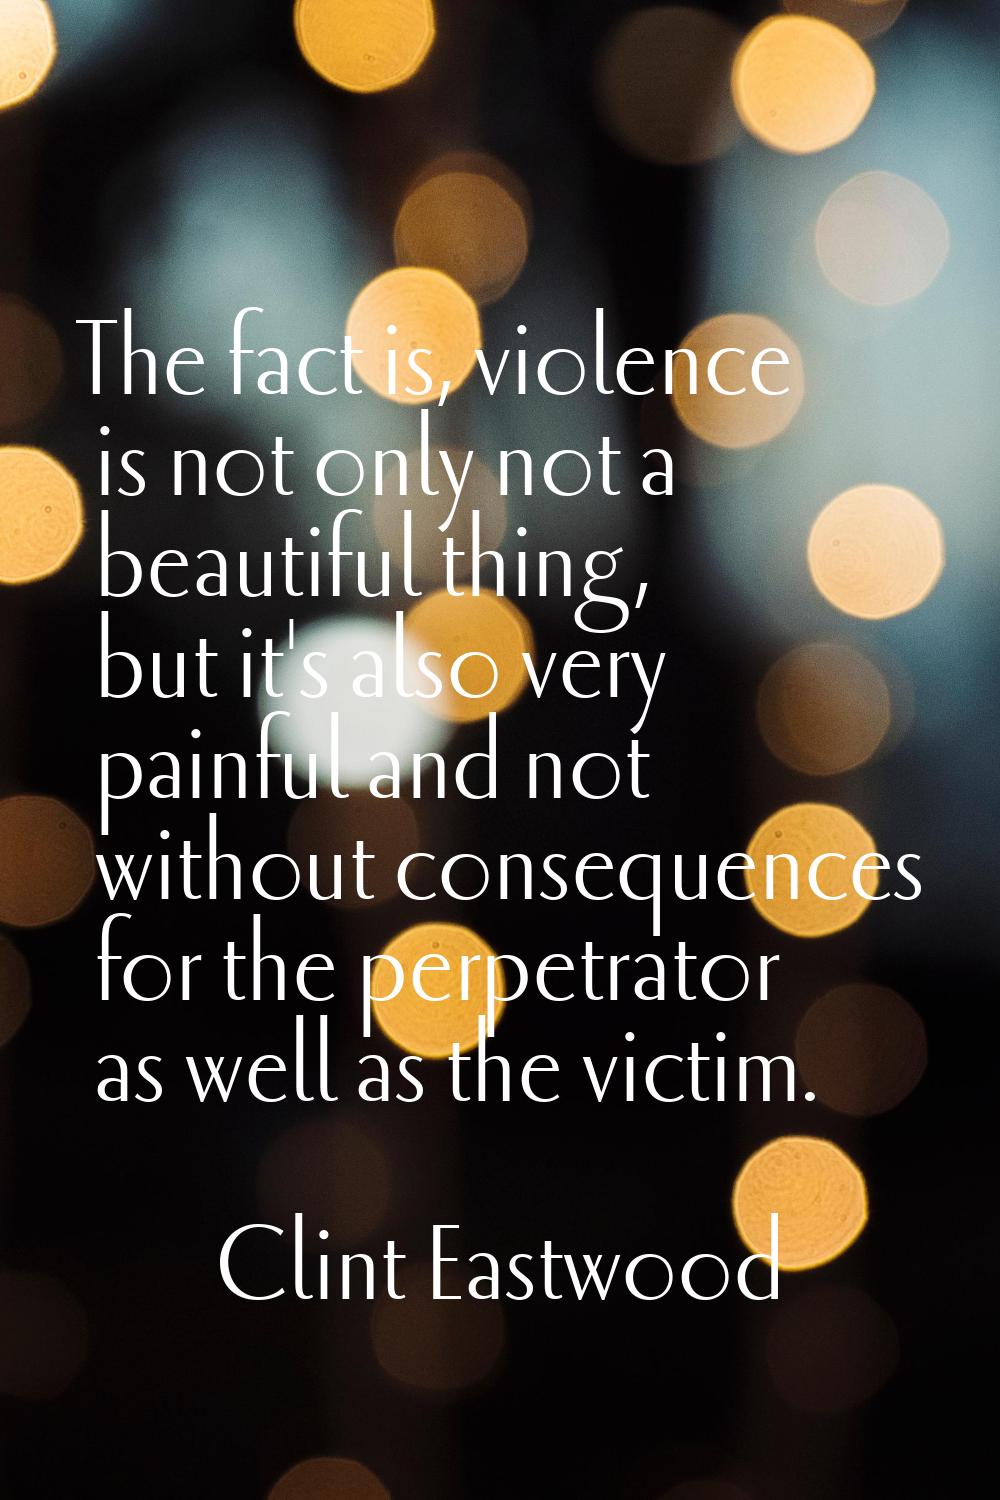 The fact is, violence is not only not a beautiful thing, but it's also very painful and not without